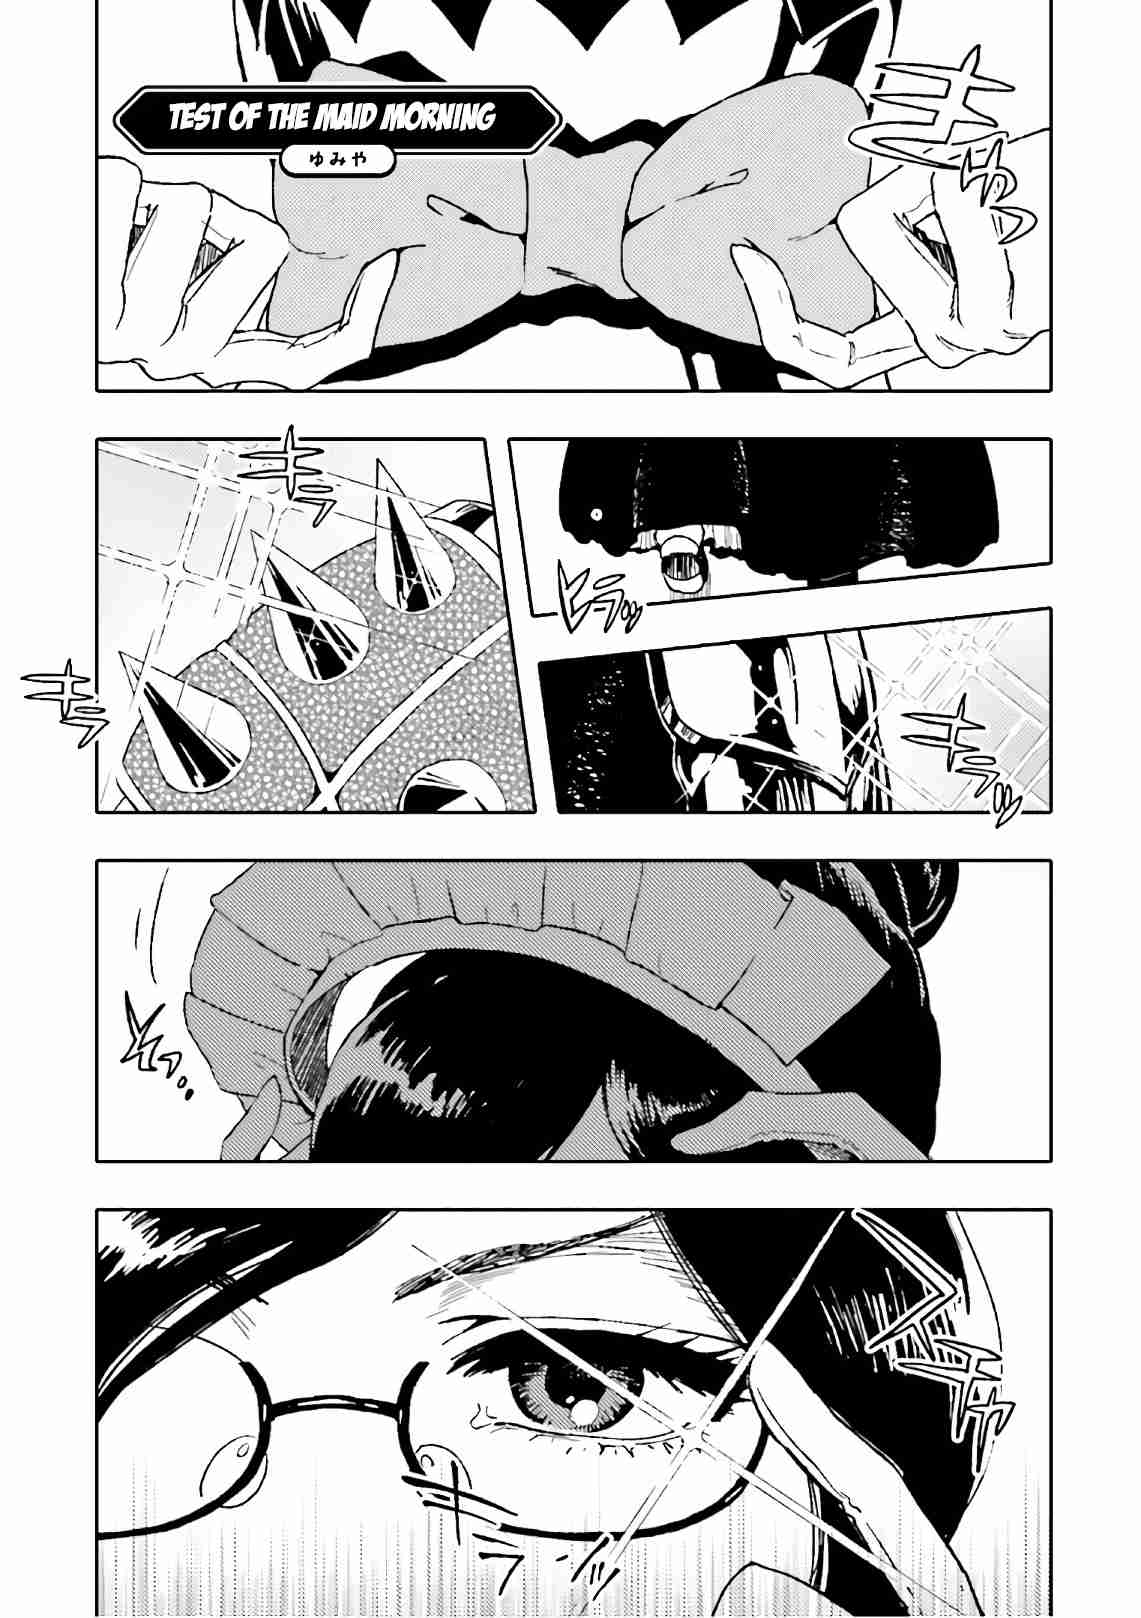 Overlord Official Comic A La Carte Vol. 3 Ch. 37 Test of the Maid Morning